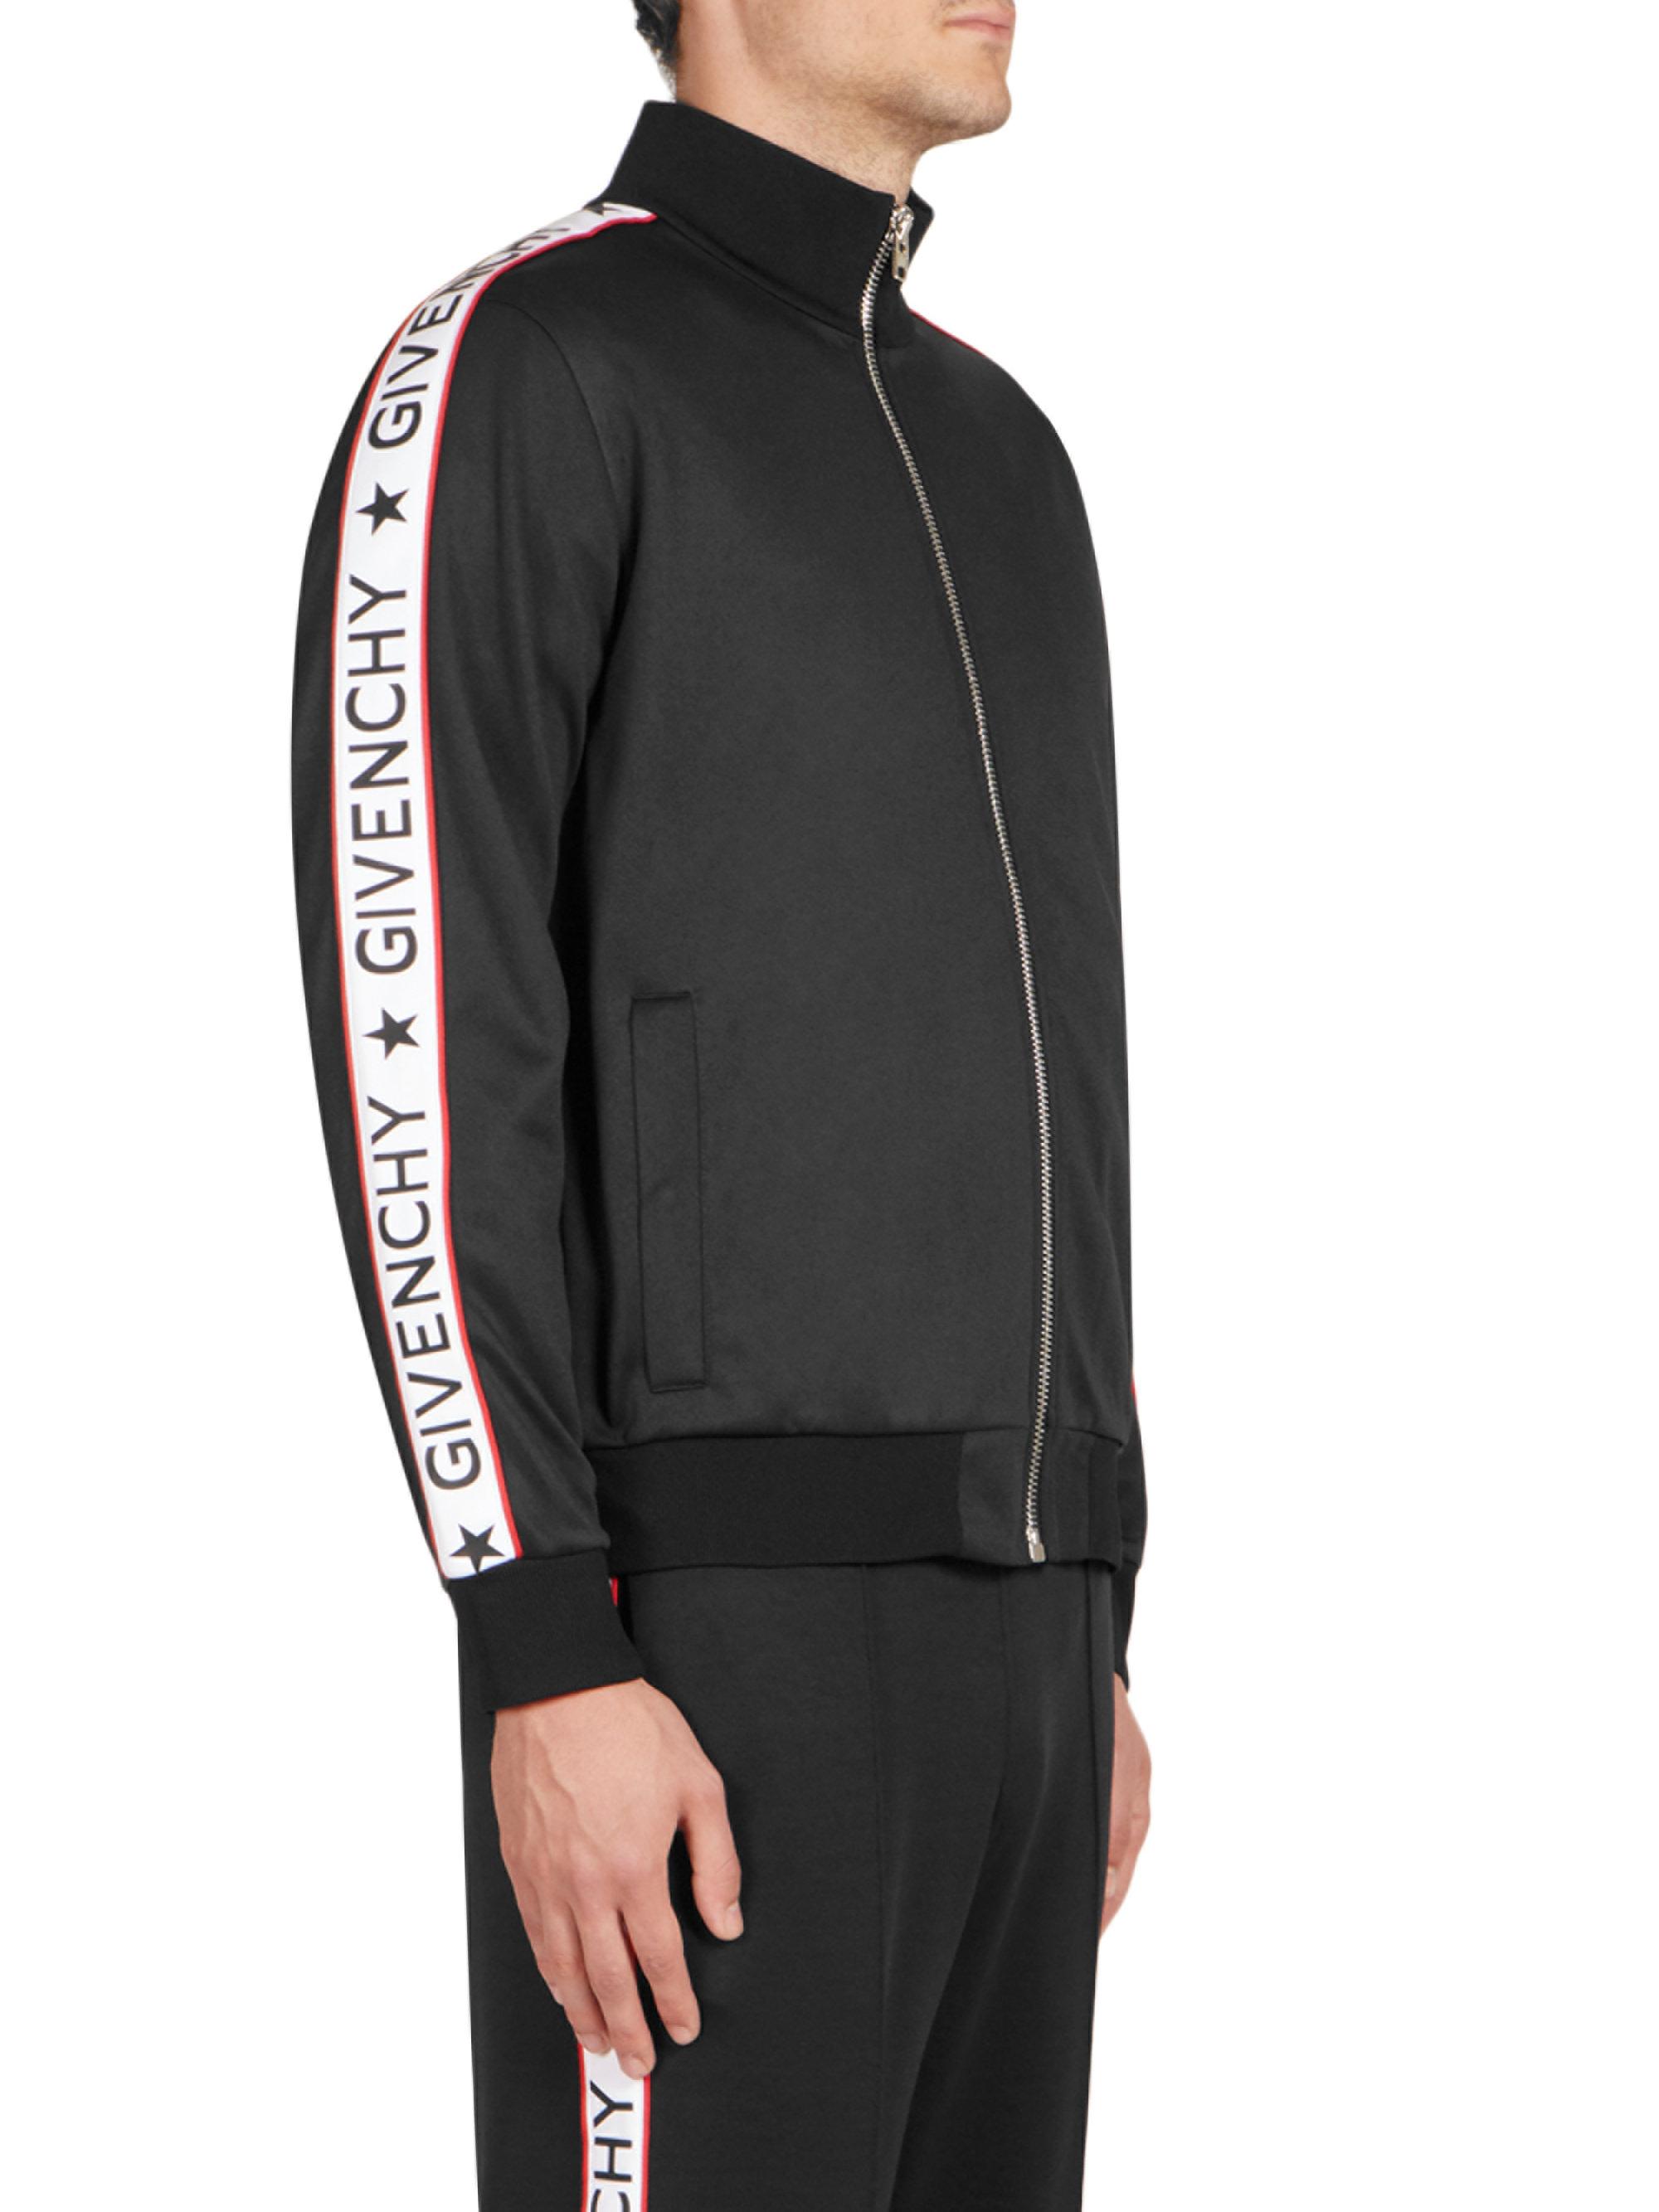 Givenchy Synthetic Logo Track Jacket in Black for Men - Lyst